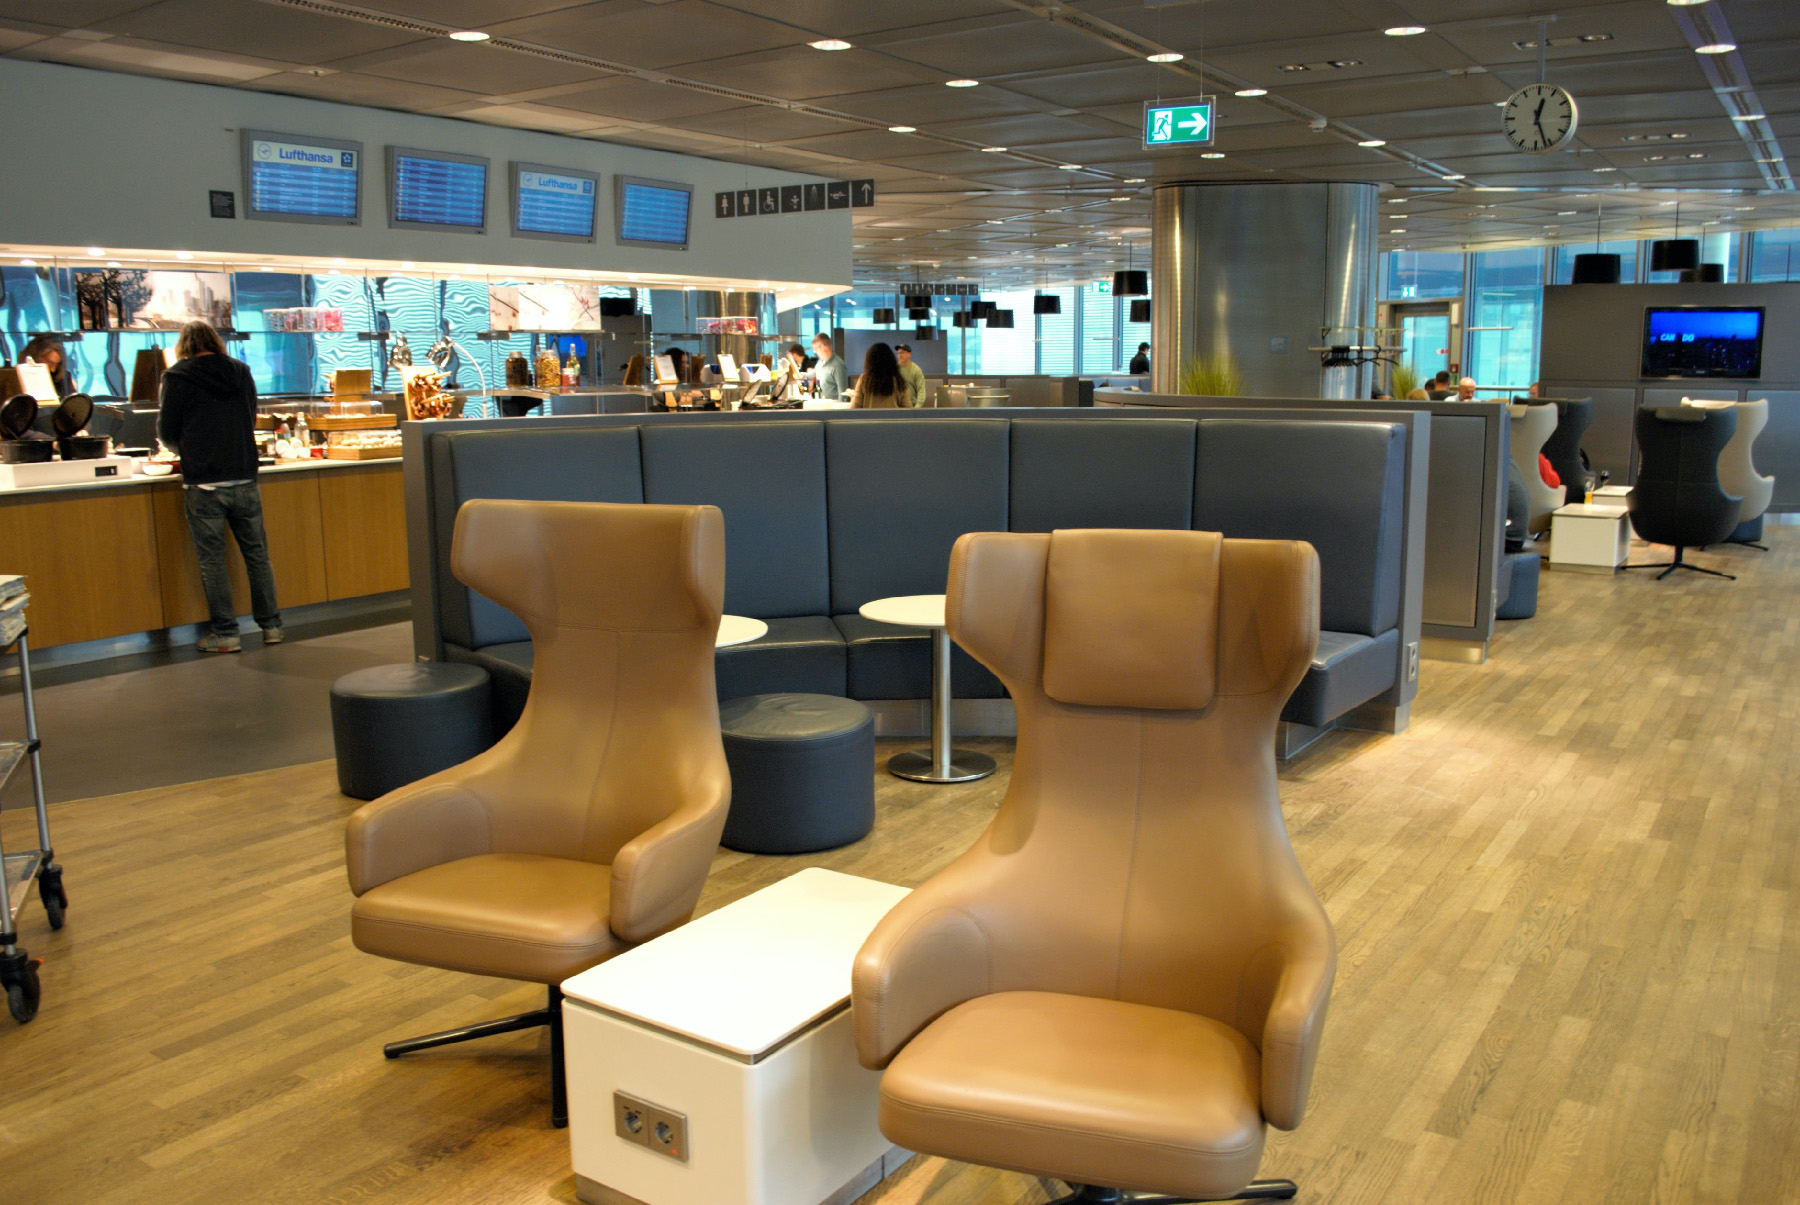 Condor Airlines shares a lounge with Lufthansa Airline at the airport in Frankfurt, Germany.